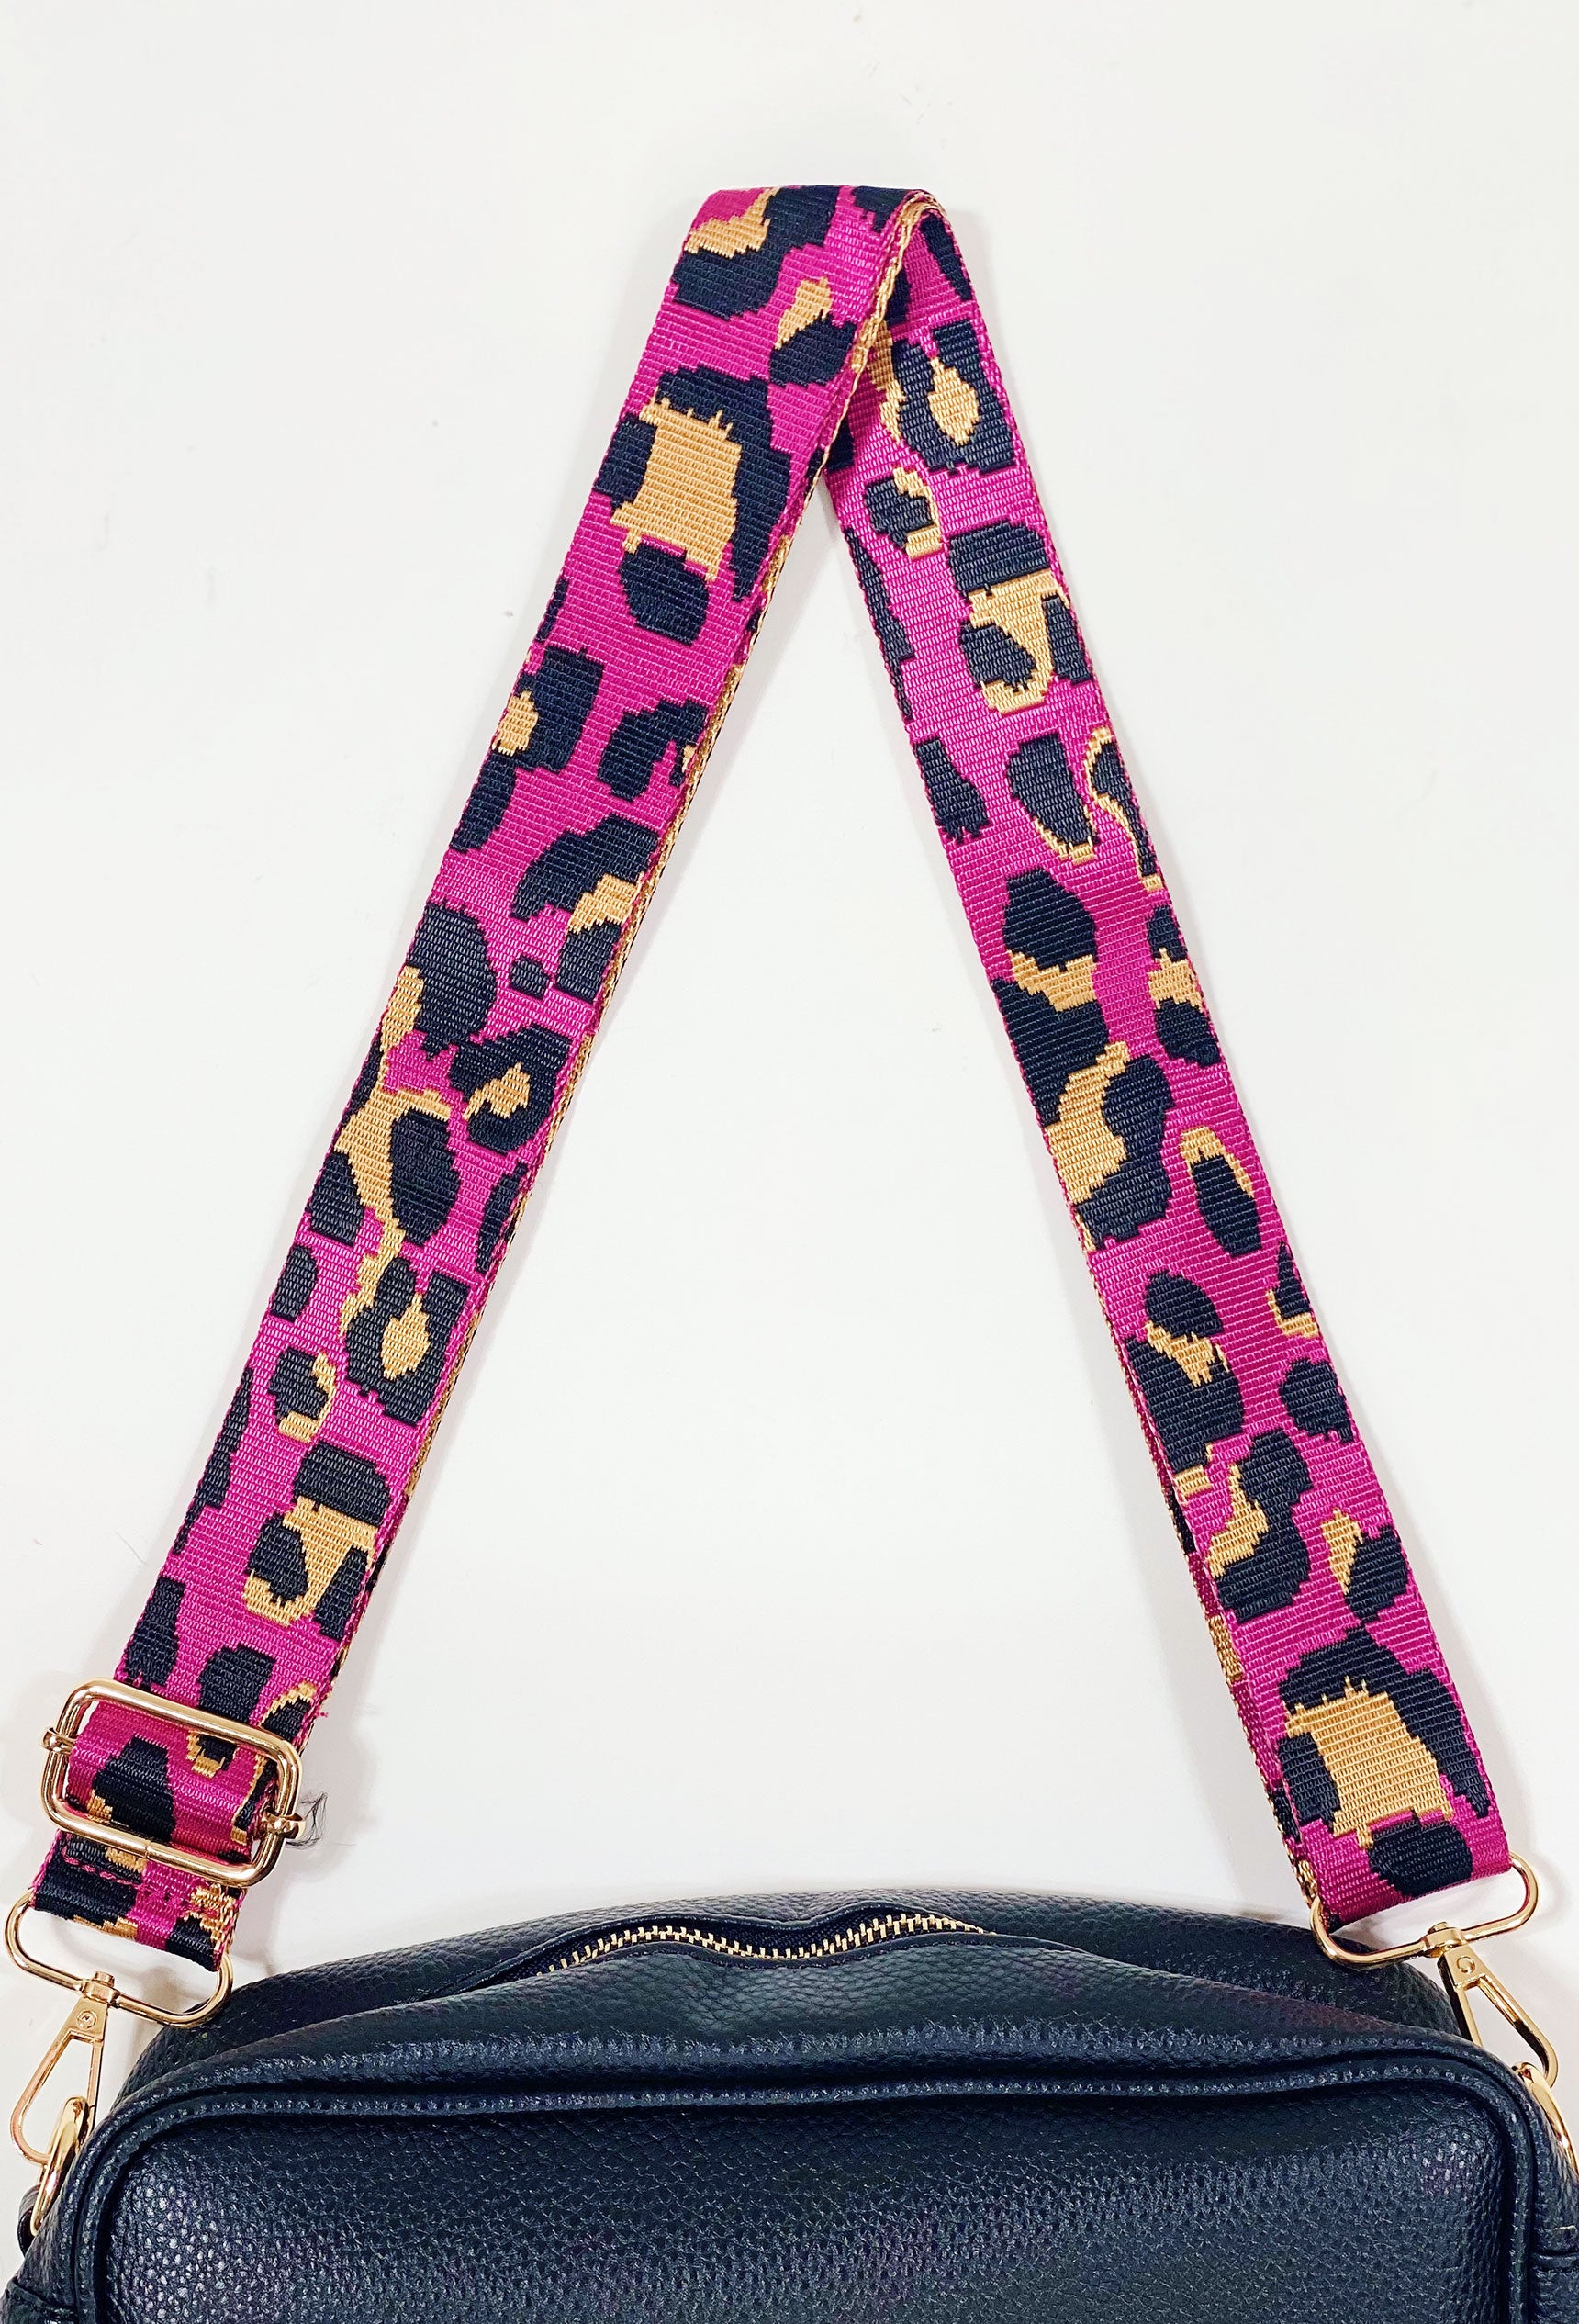 Purse Strap Replacement Crossbody, Pink Leopard Purse Strap for Women  Adjustable Bag Straps Replacement Crossbody Replacement Straps for Handbags